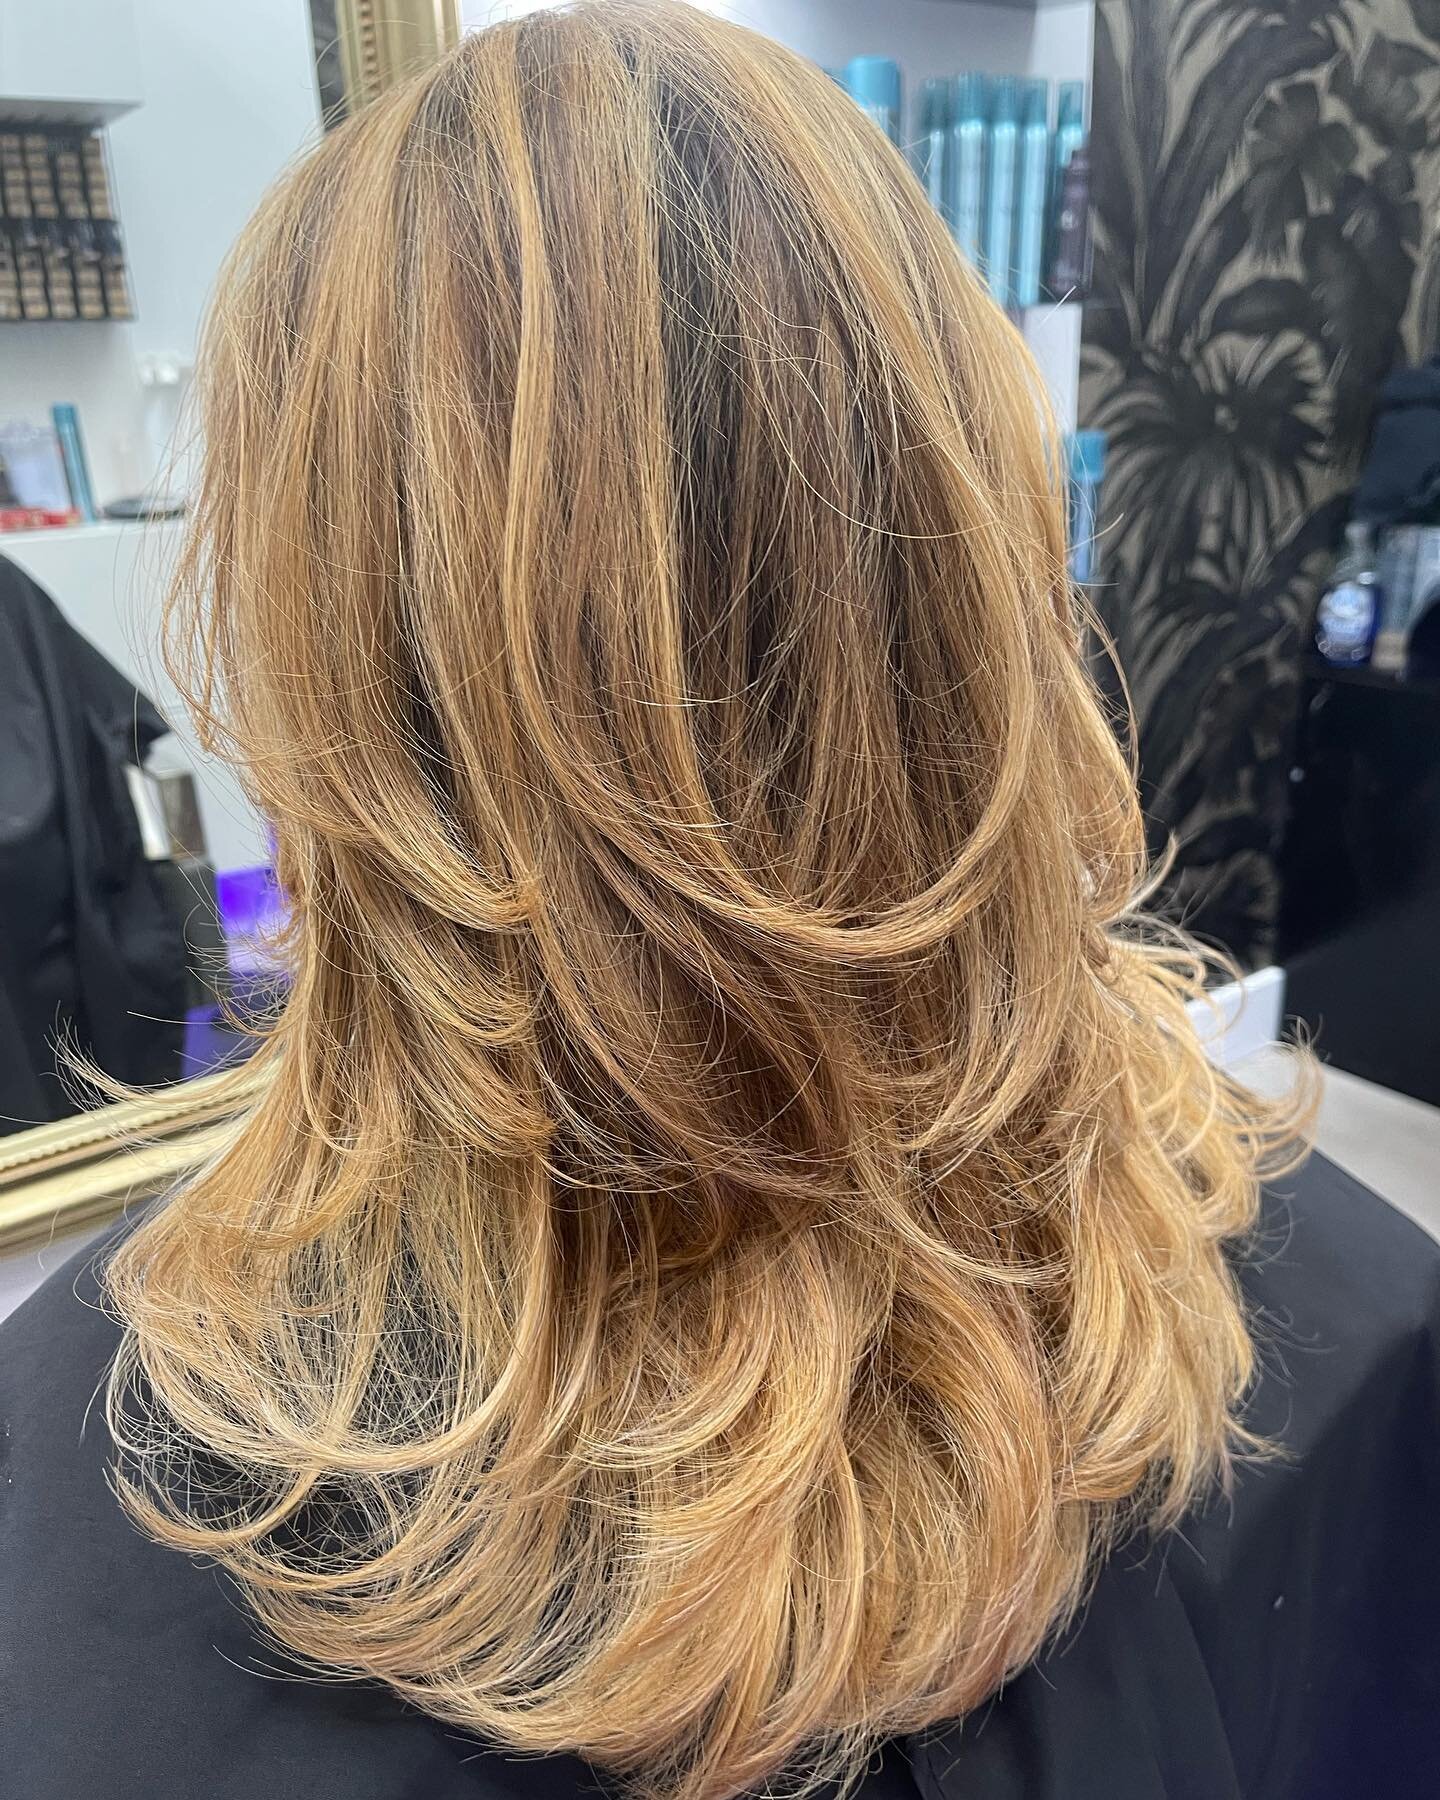 After a year with no cut and color I did a full head of #balayage toned with #wella ash/gold tones.. styling products by @renefurtererusa #texturespray shine spray and hair spray and a #keratin treatment leave in spray&hellip;